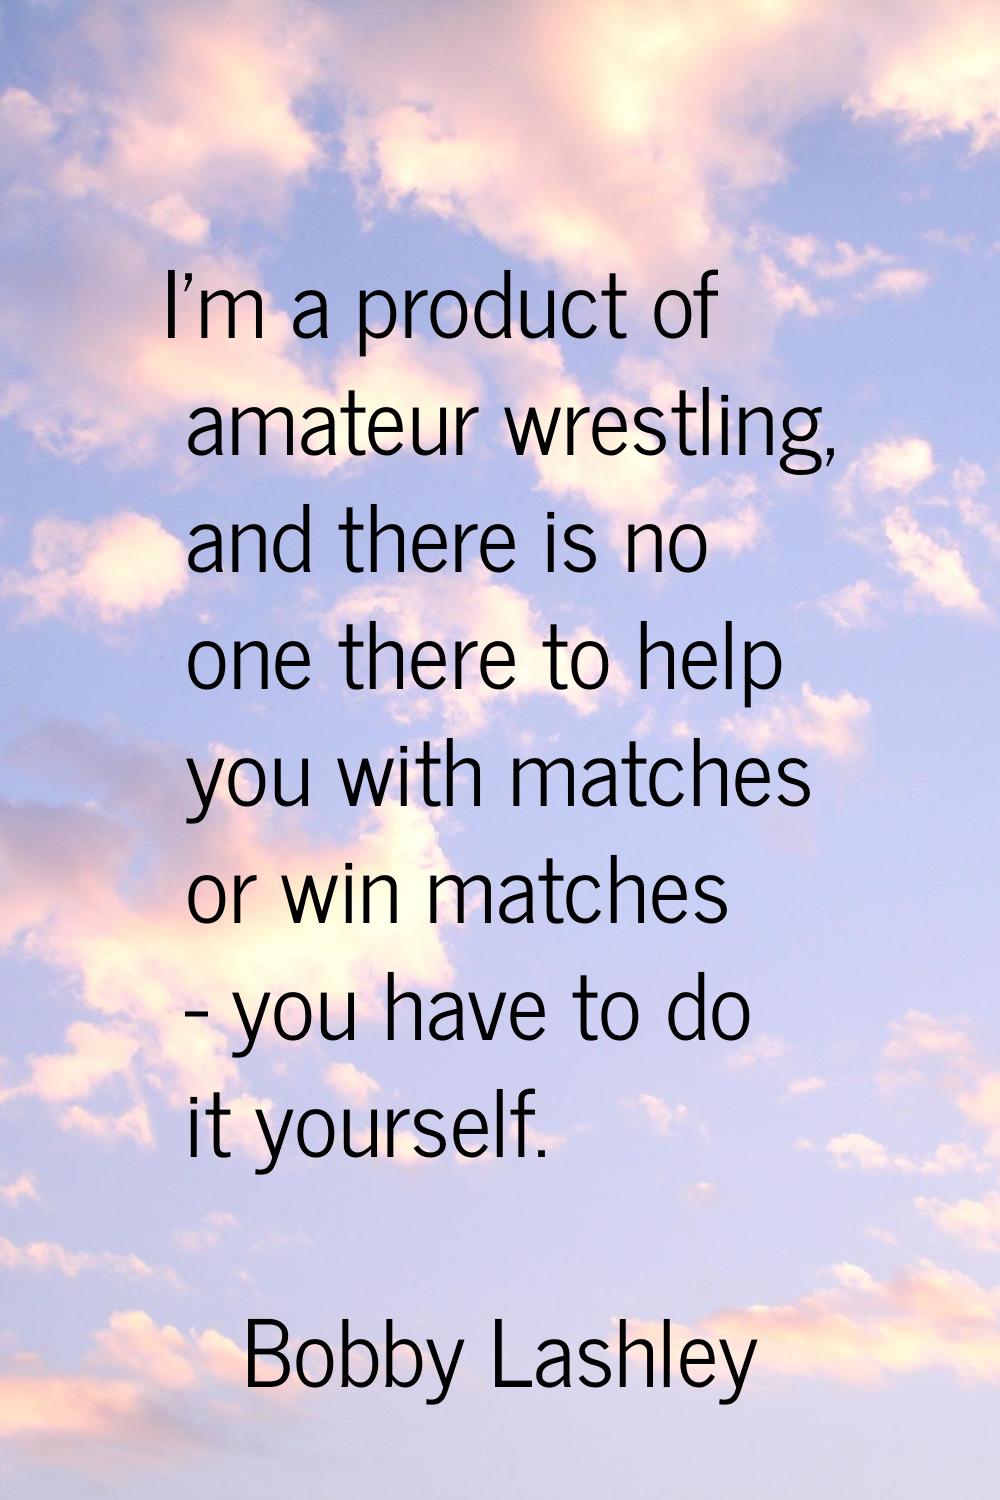 I'm a product of amateur wrestling, and there is no one there to help you with matches or win match